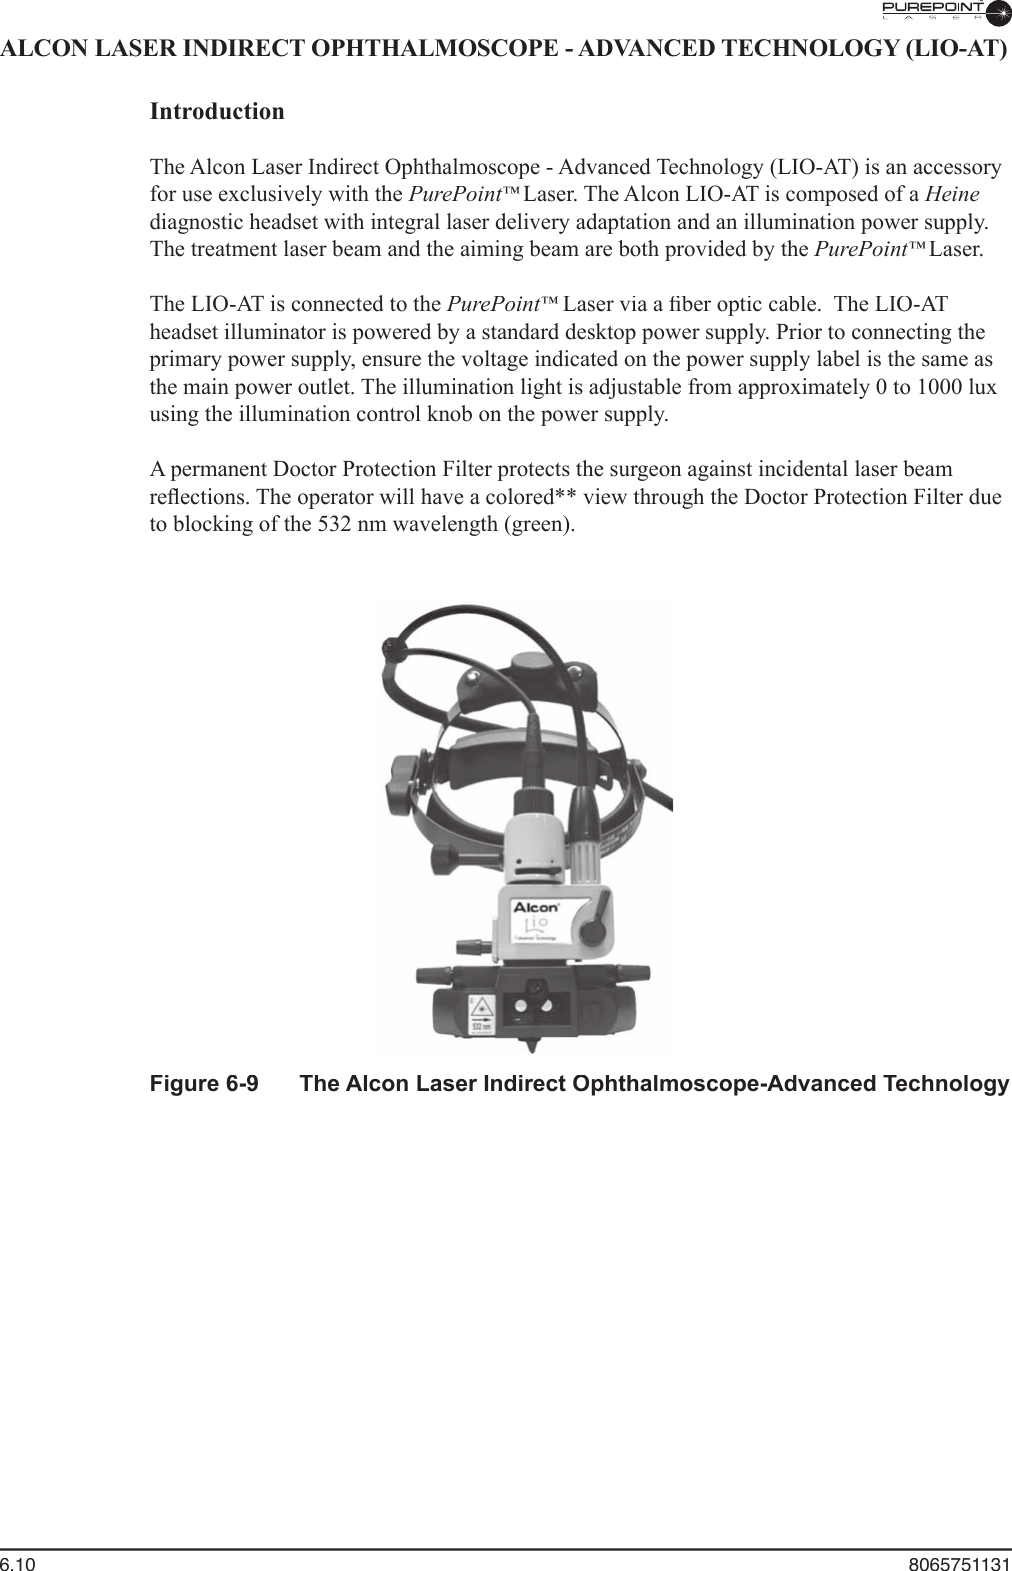 6.10  8065751131ALCON LASER INDIRECT OPHTHALMOSCOPE - ADVANCED TECHNOLOGY (LIO-AT)  Introduction  The Alcon Laser Indirect Ophthalmoscope - Advanced Technology (LIO-AT) is an accessory for use exclusively with the PurePoint™ Laser. The Alcon LIO-AT is composed of a Heinediagnostic headset with integral laser delivery adaptation and an illumination power supply. The treatment laser beam and the aiming beam are both provided by the PurePoint™ Laser.    The LIO-AT is connected to the PurePoint™ Laser via a ﬁ ber optic cable.  The LIO-AT ™ Laser via a ﬁ ber optic cable.  The LIO-AT ™headset illuminator is powered by a standard desktop power supply. Prior to connecting the primary power supply, ensure the voltage indicated on the power supply label is the same as the main power outlet. The illumination light is adjustable from approximately 0 to 1000 lux using the illumination control knob on the power supply.  A permanent Doctor Protection Filter protects the surgeon against incidental laser beam reﬂ ections. The operator will have a colored** view through the Doctor Protection Filter due to blocking of the 532 nm wavelength (green). Figure 6-9  The Alcon Laser Indirect Ophthalmoscope-Advanced Technology